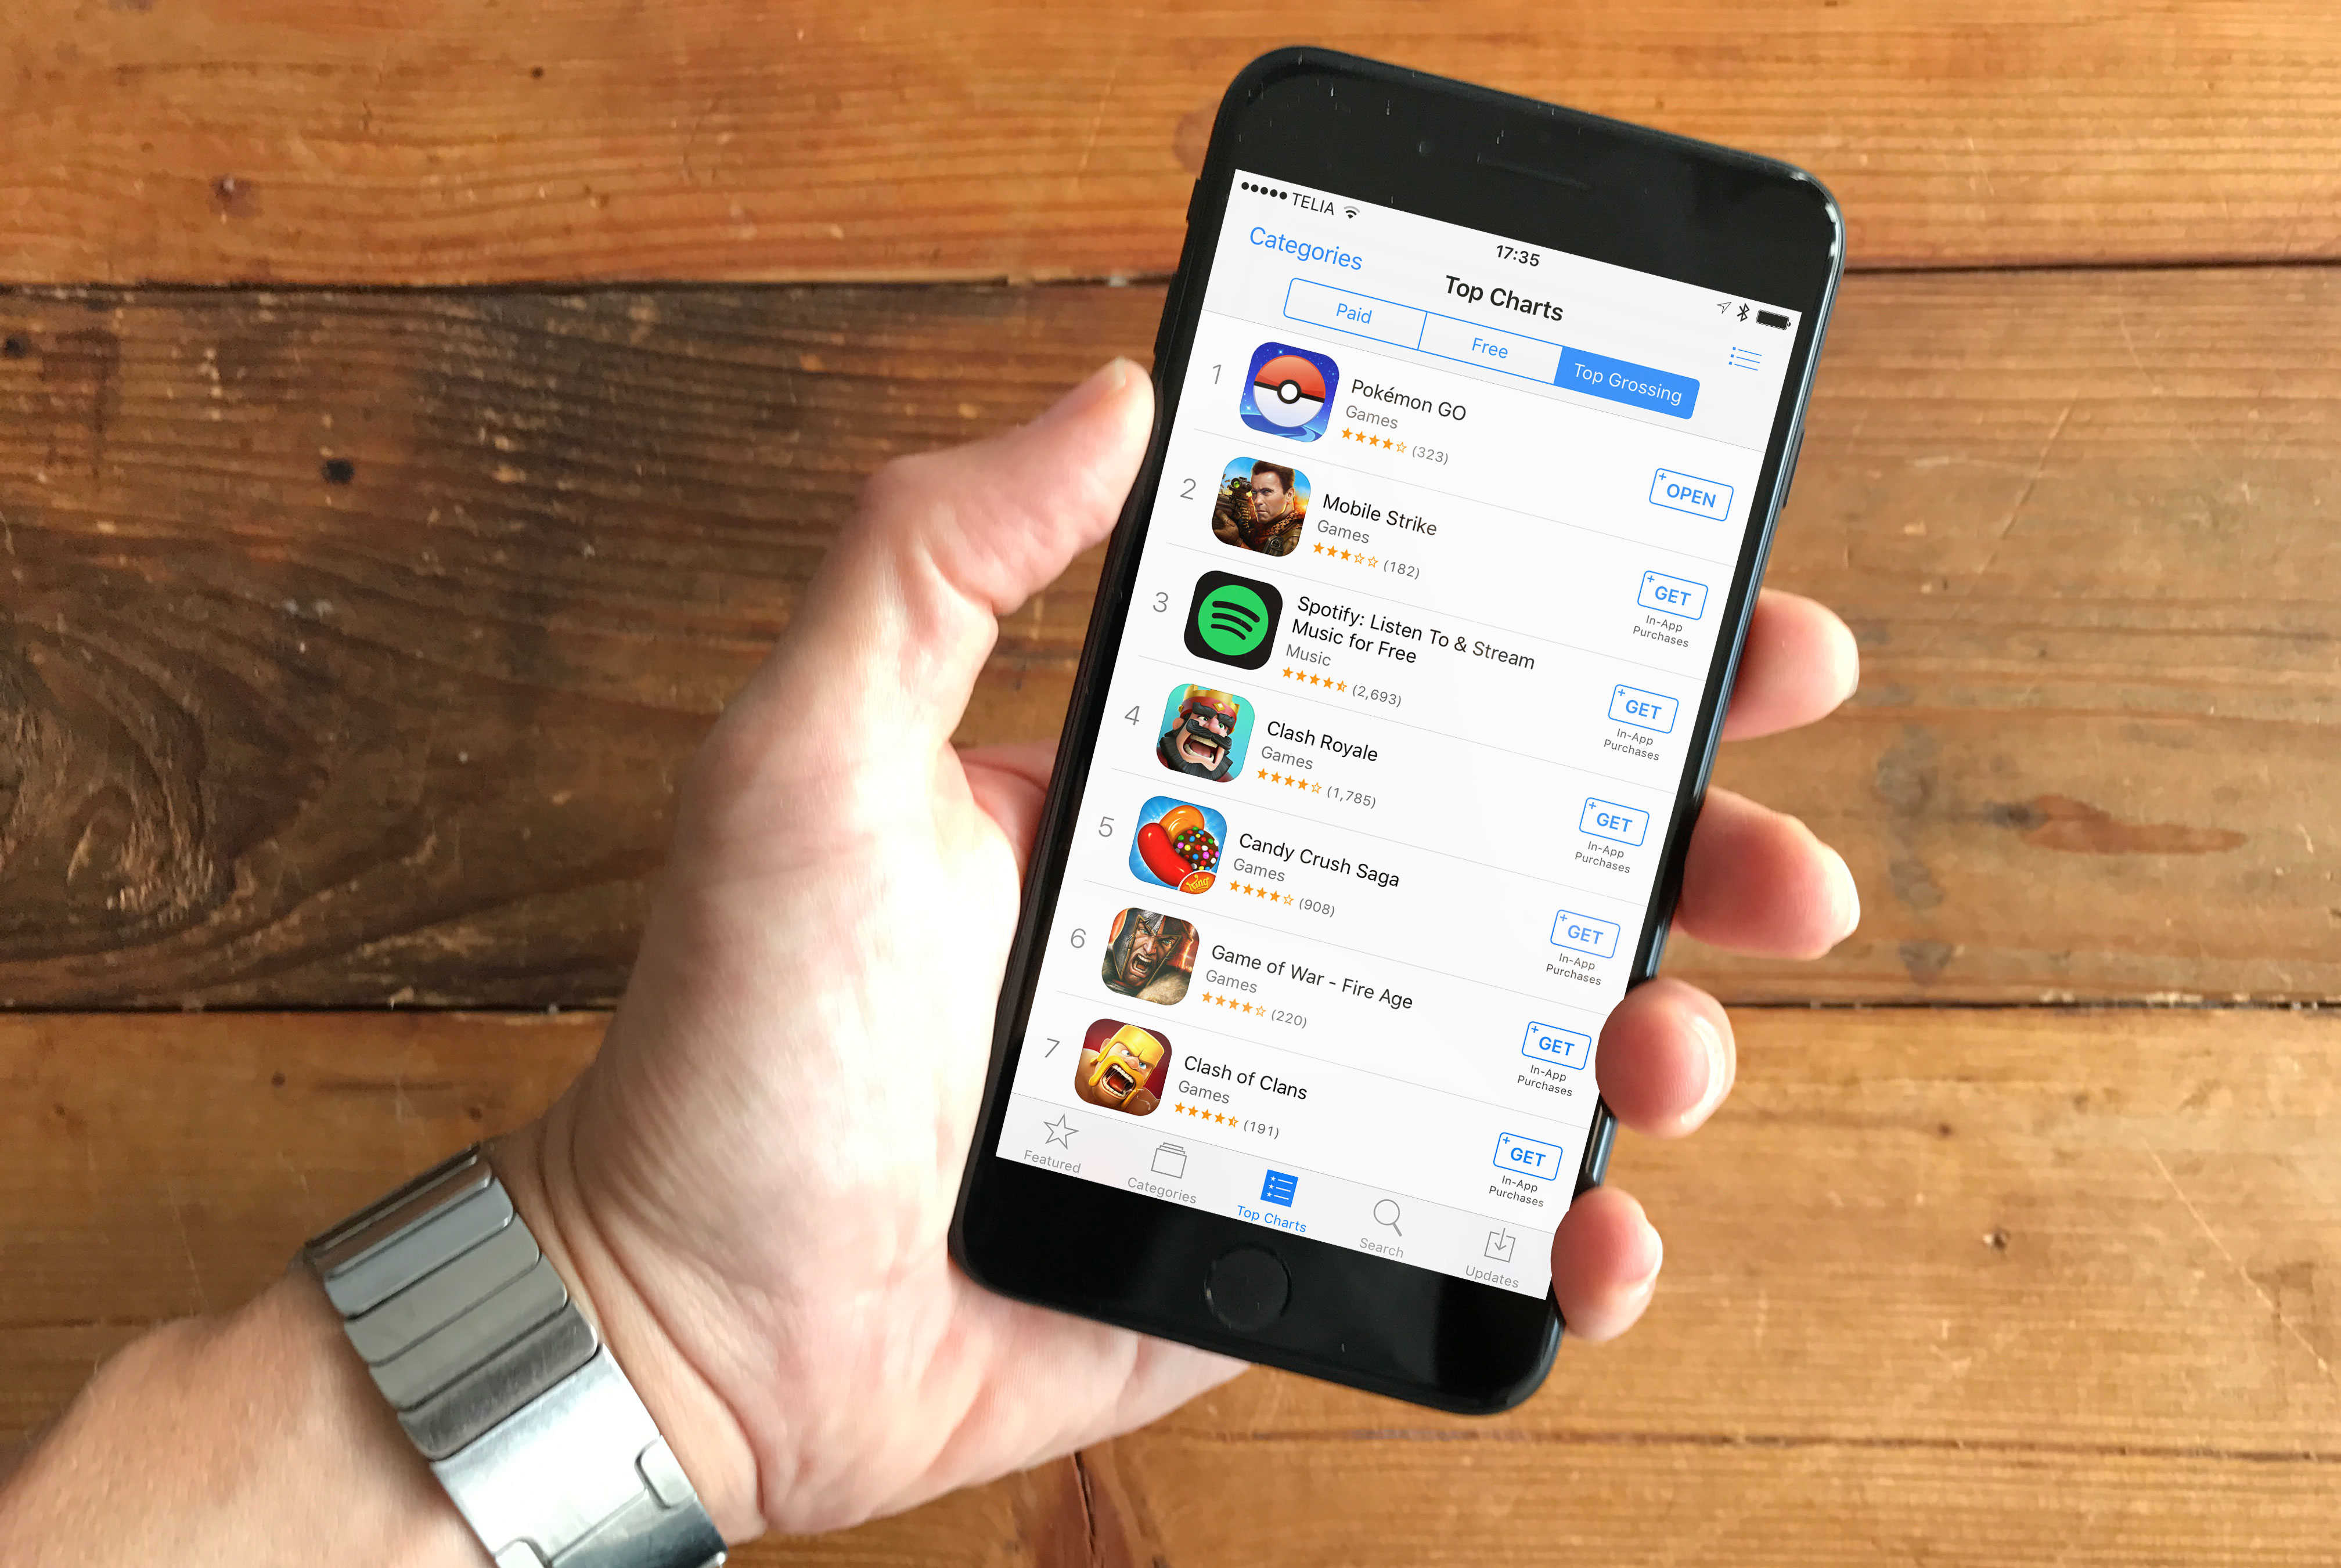 Only one of the top 200 grossing apps is a paid app